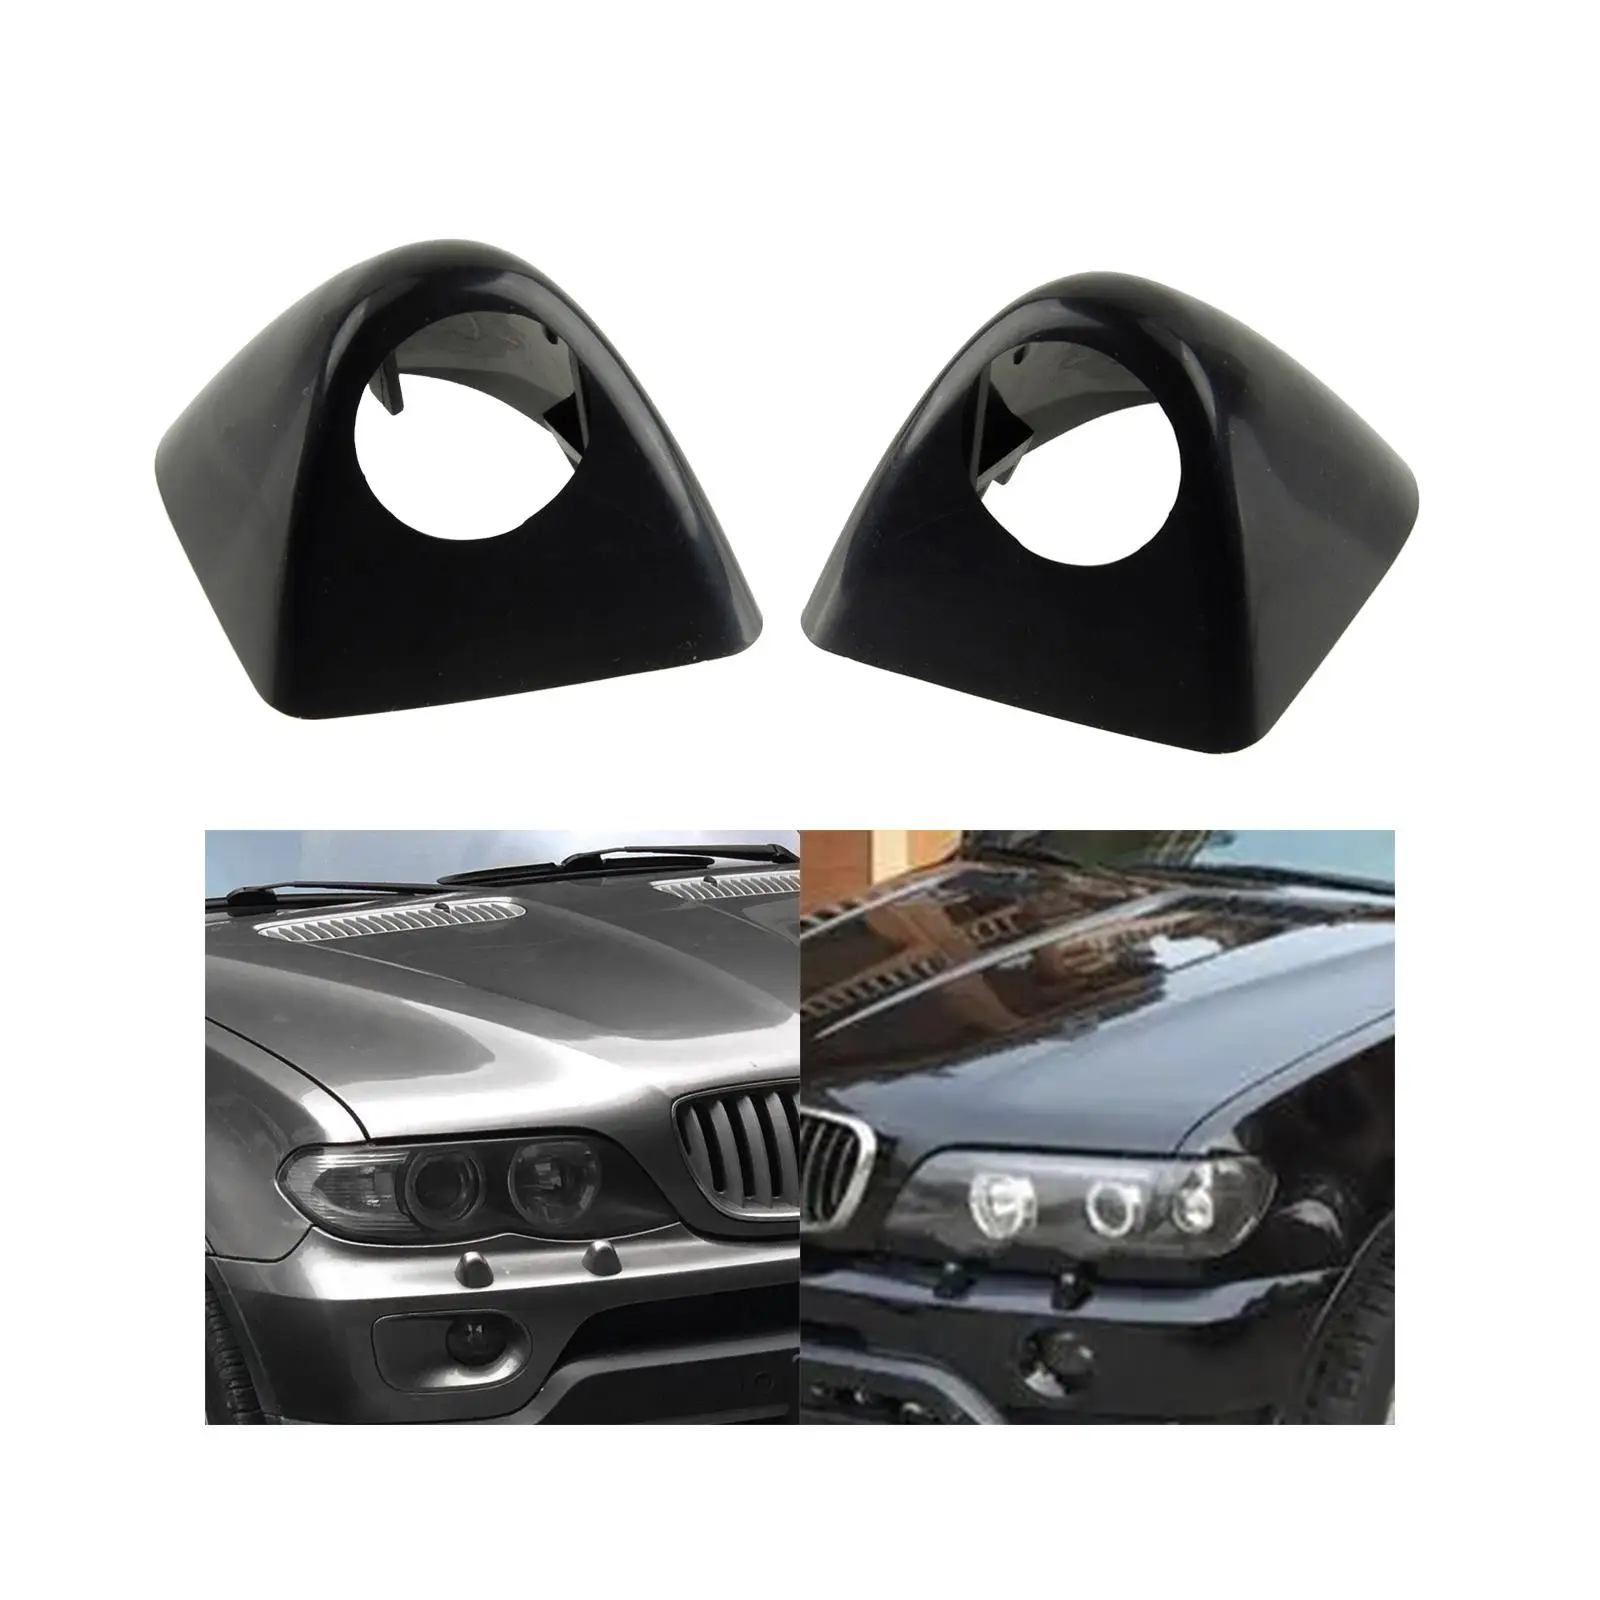 Replacement Headlight Washer Cover Sturdy for bmw E53 Parts